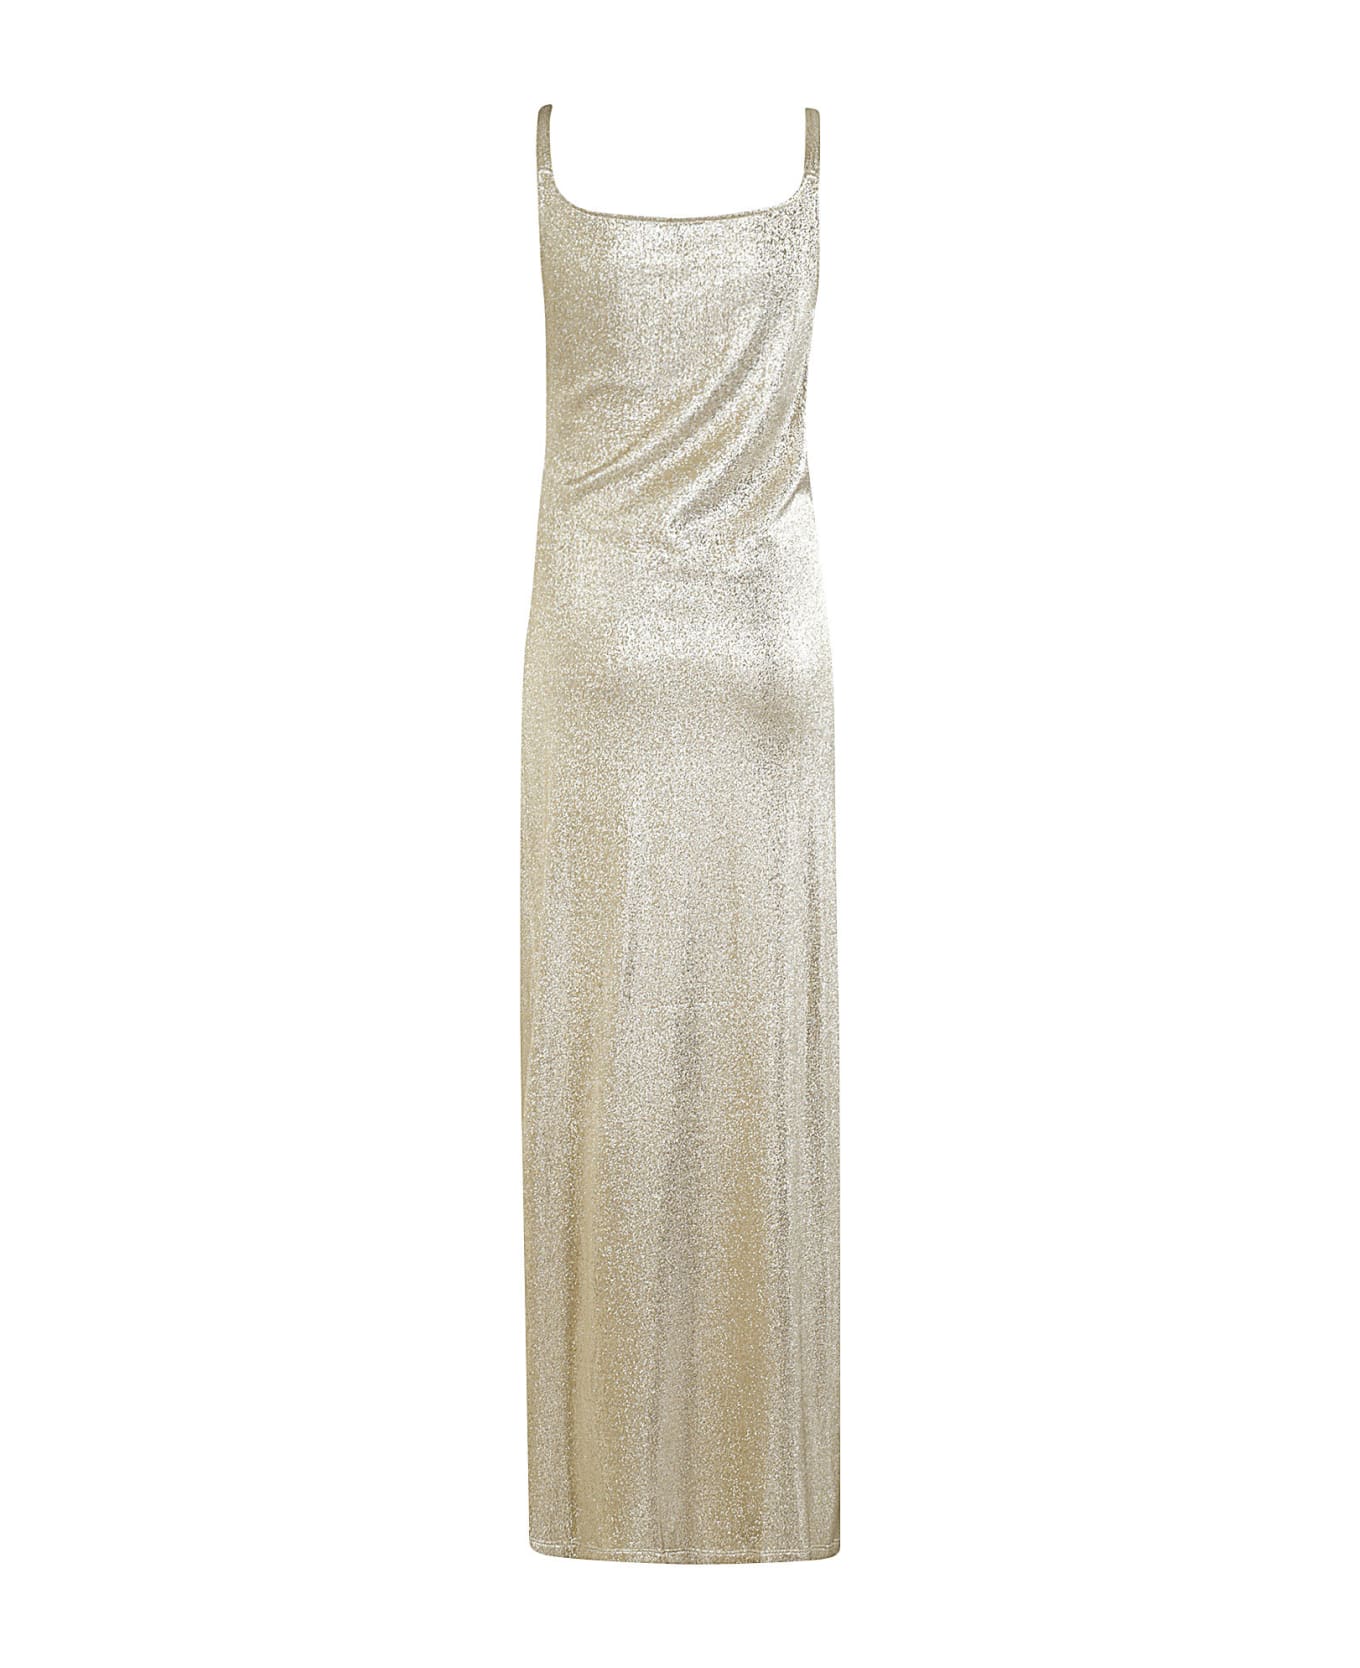 Paco Rabanne Robe - Silver Gold